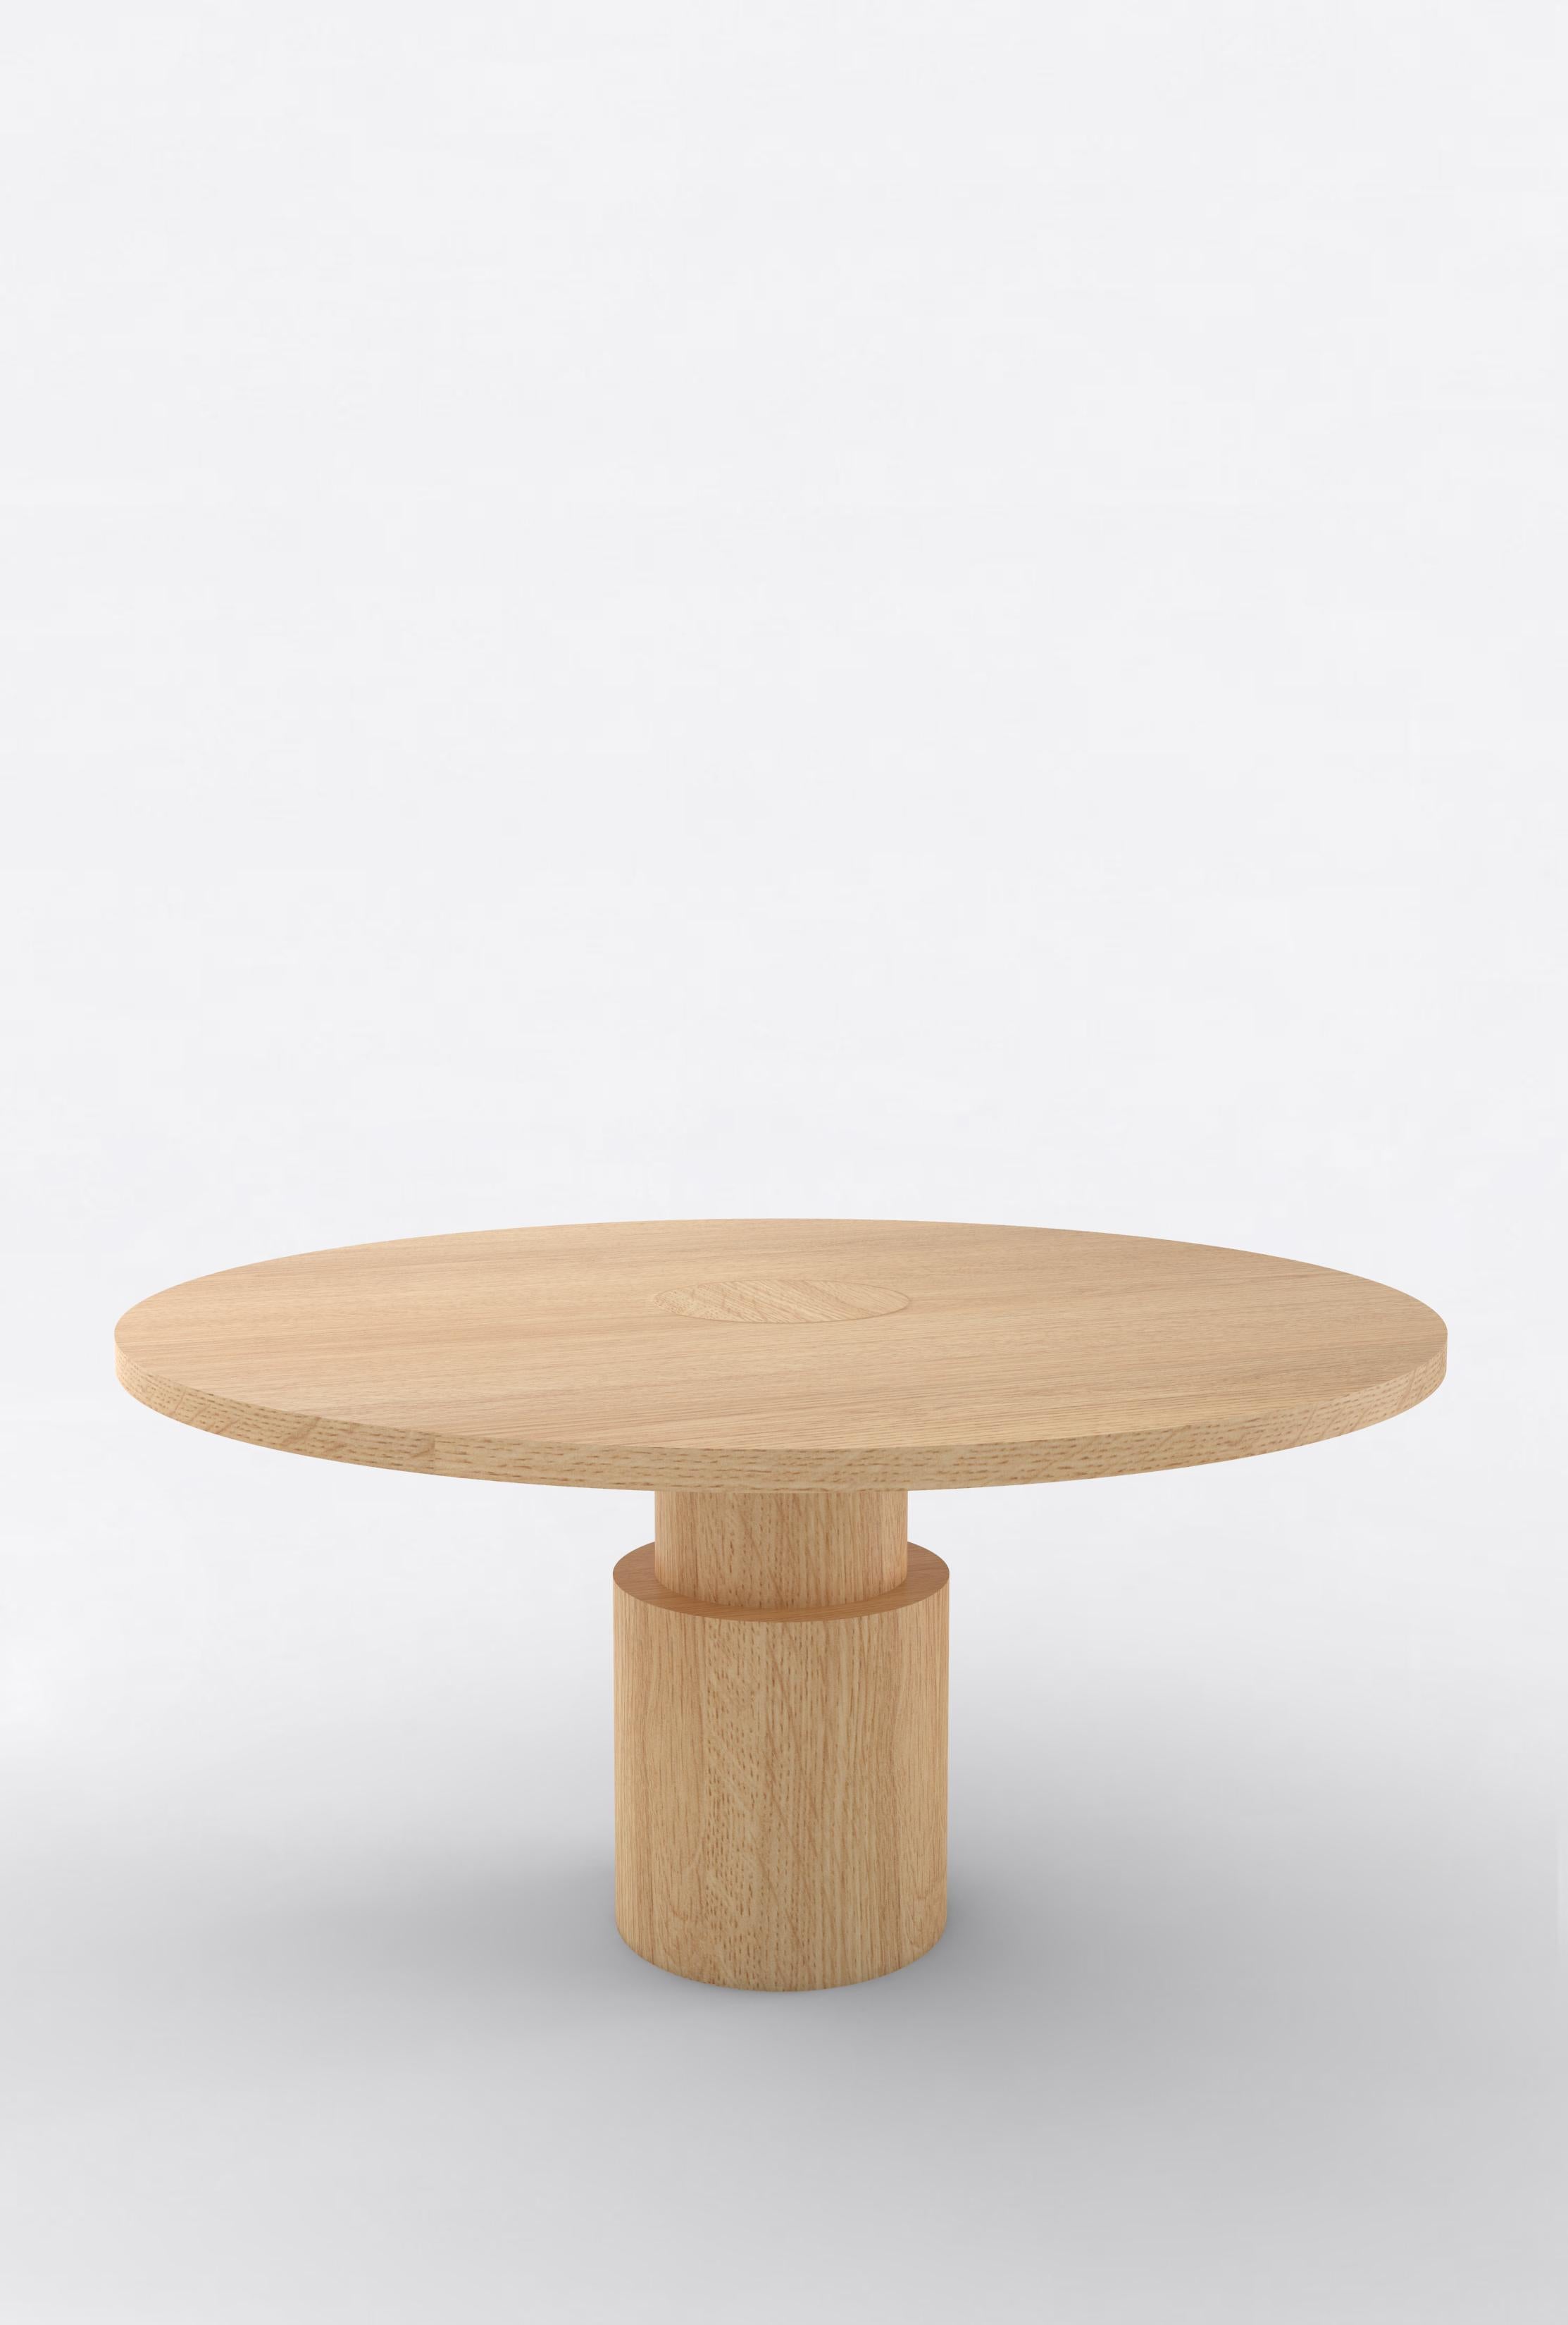 Orphan work 100 dining table, 2019
Shown in oak.
Available in natural oak.
Measures: 60